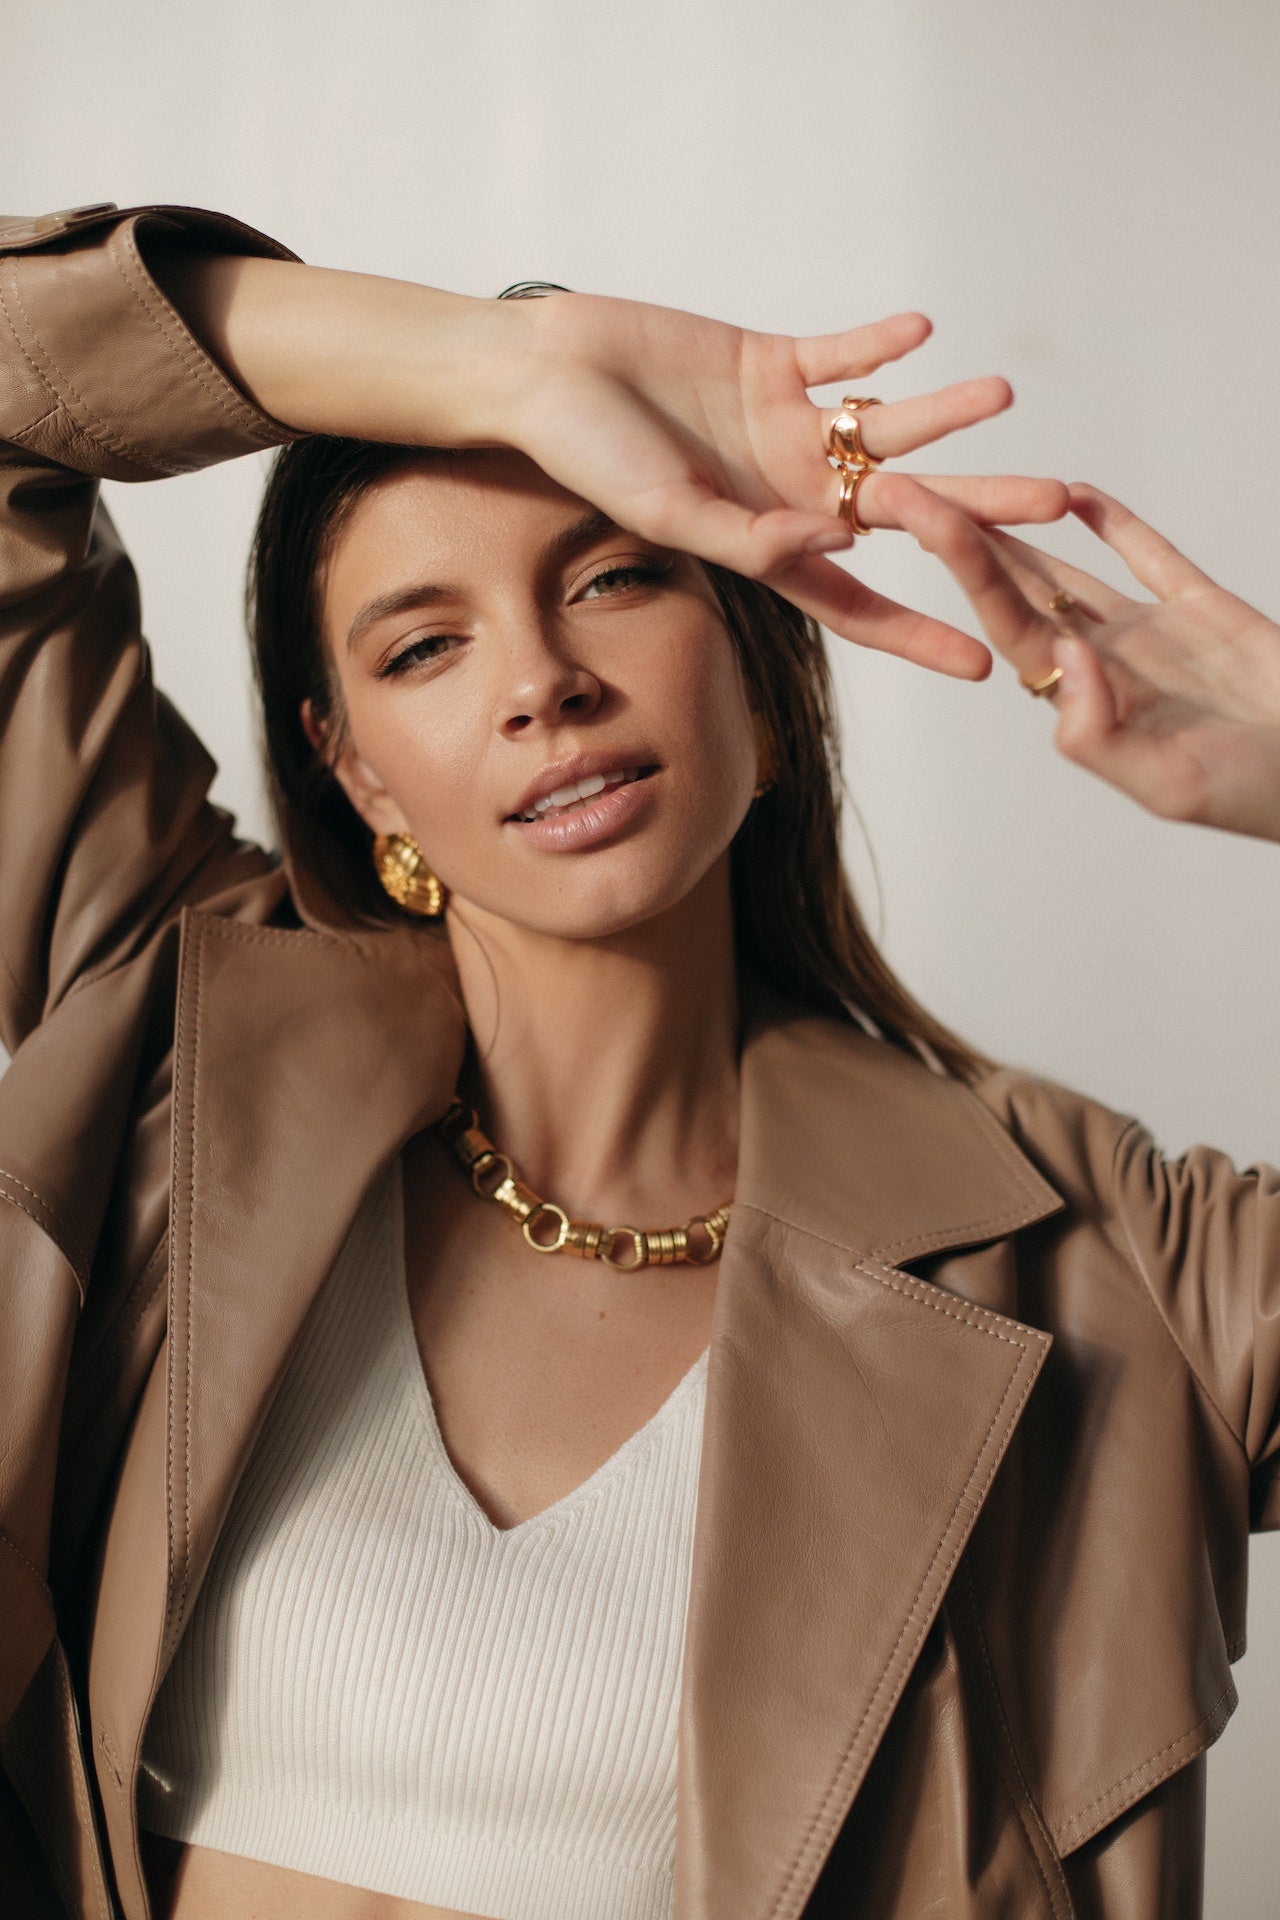 Stylish female model wearing a light brown leather jacket, white crop top and golden necklace, earrings, and rings.